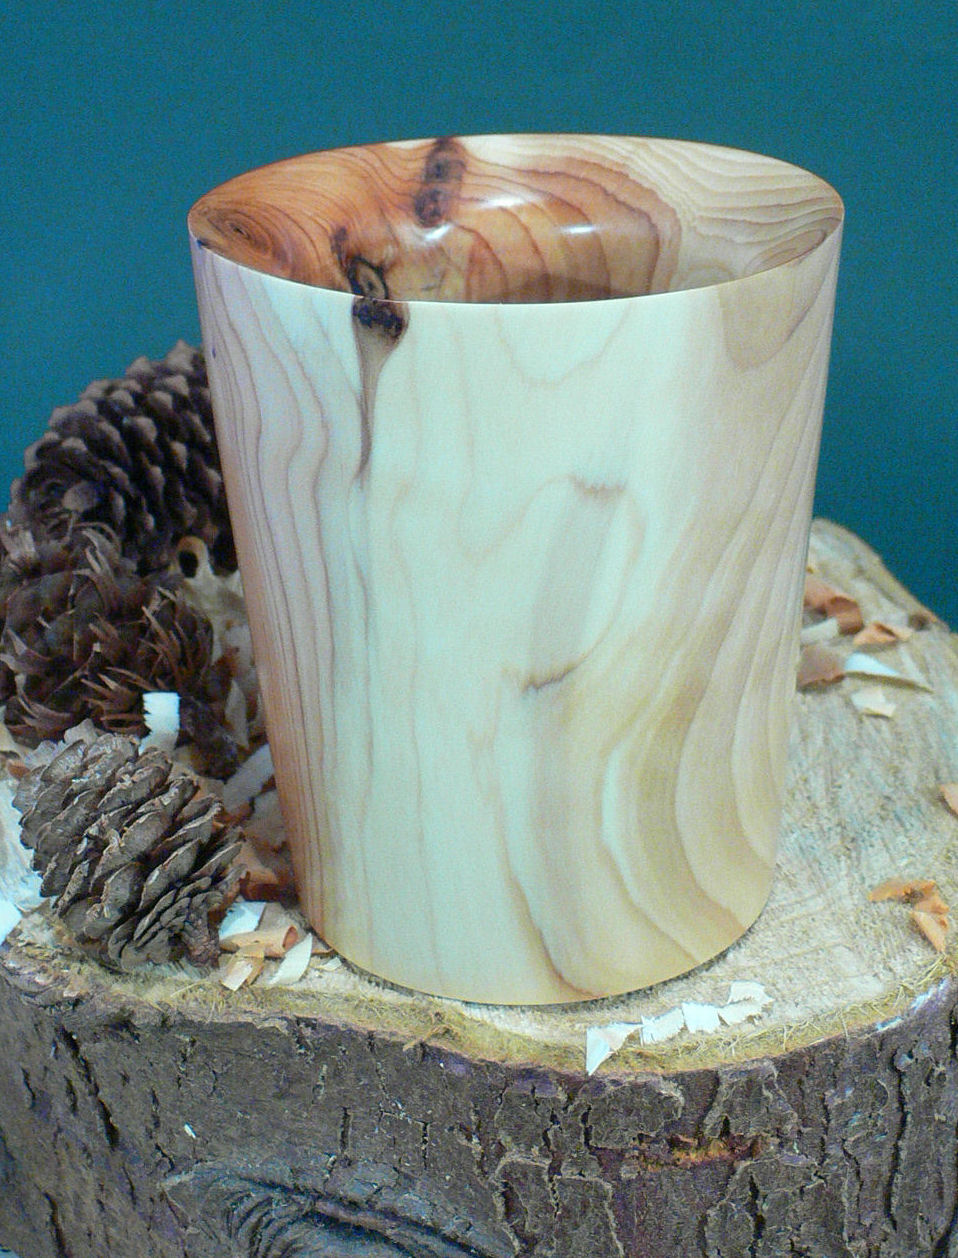 Wood art by Chris Rymer of Inside Out Wood Art made from - Yew